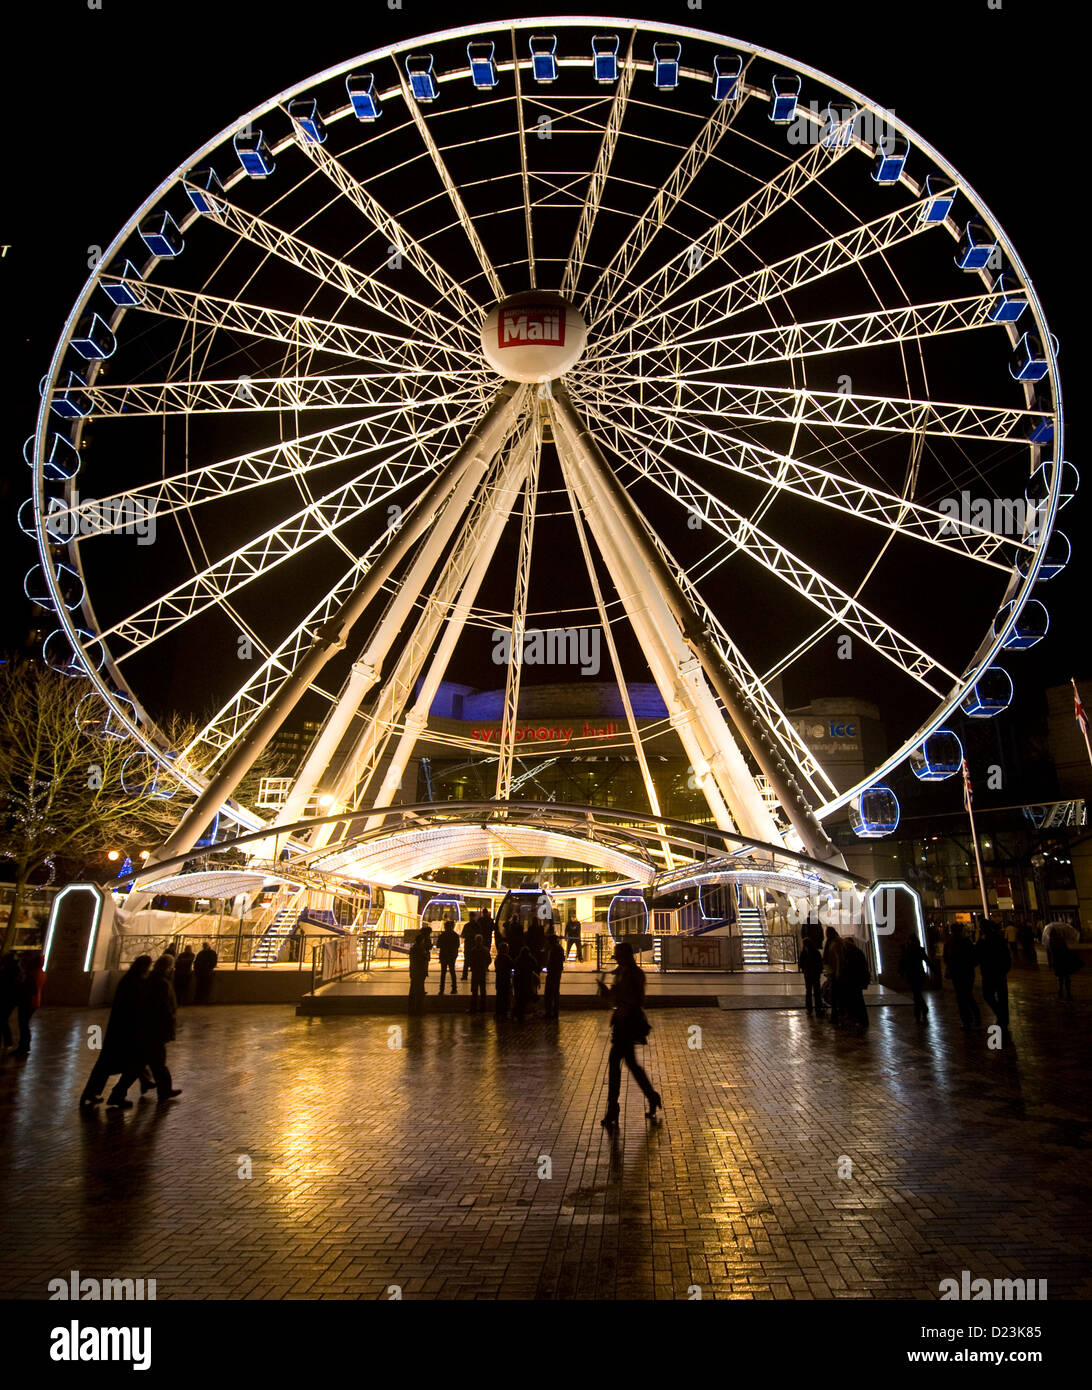 The Birmingham Eye stands tall and proud in Centenary Square Birmingham waiting for riders to fill the seats Stock Photo